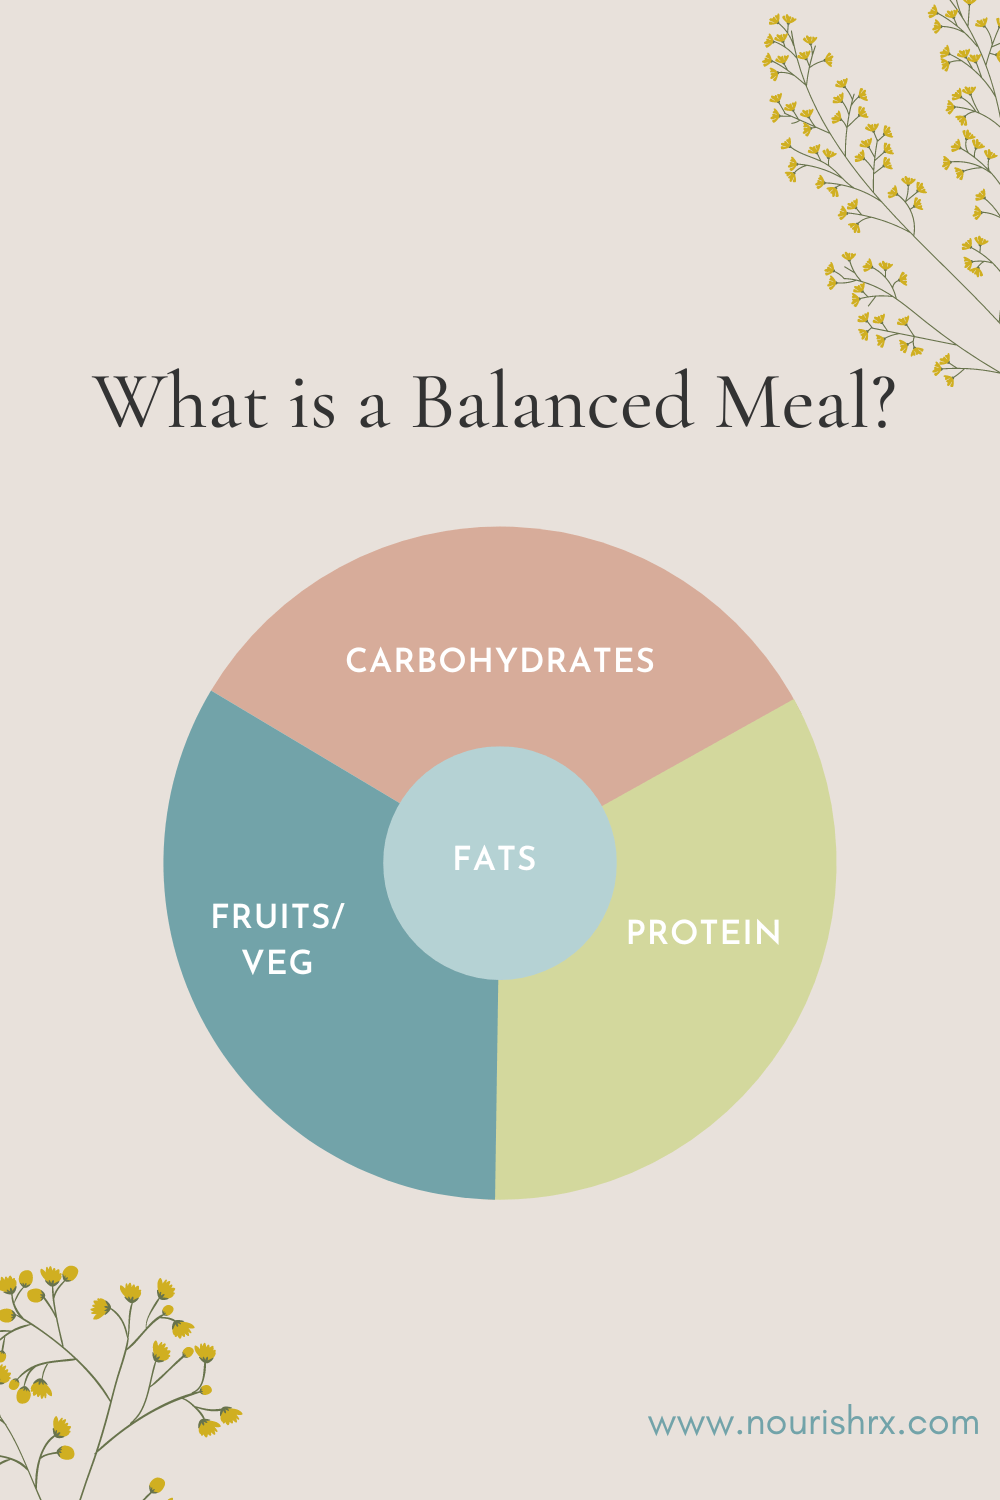 What is a Balanced Meal?